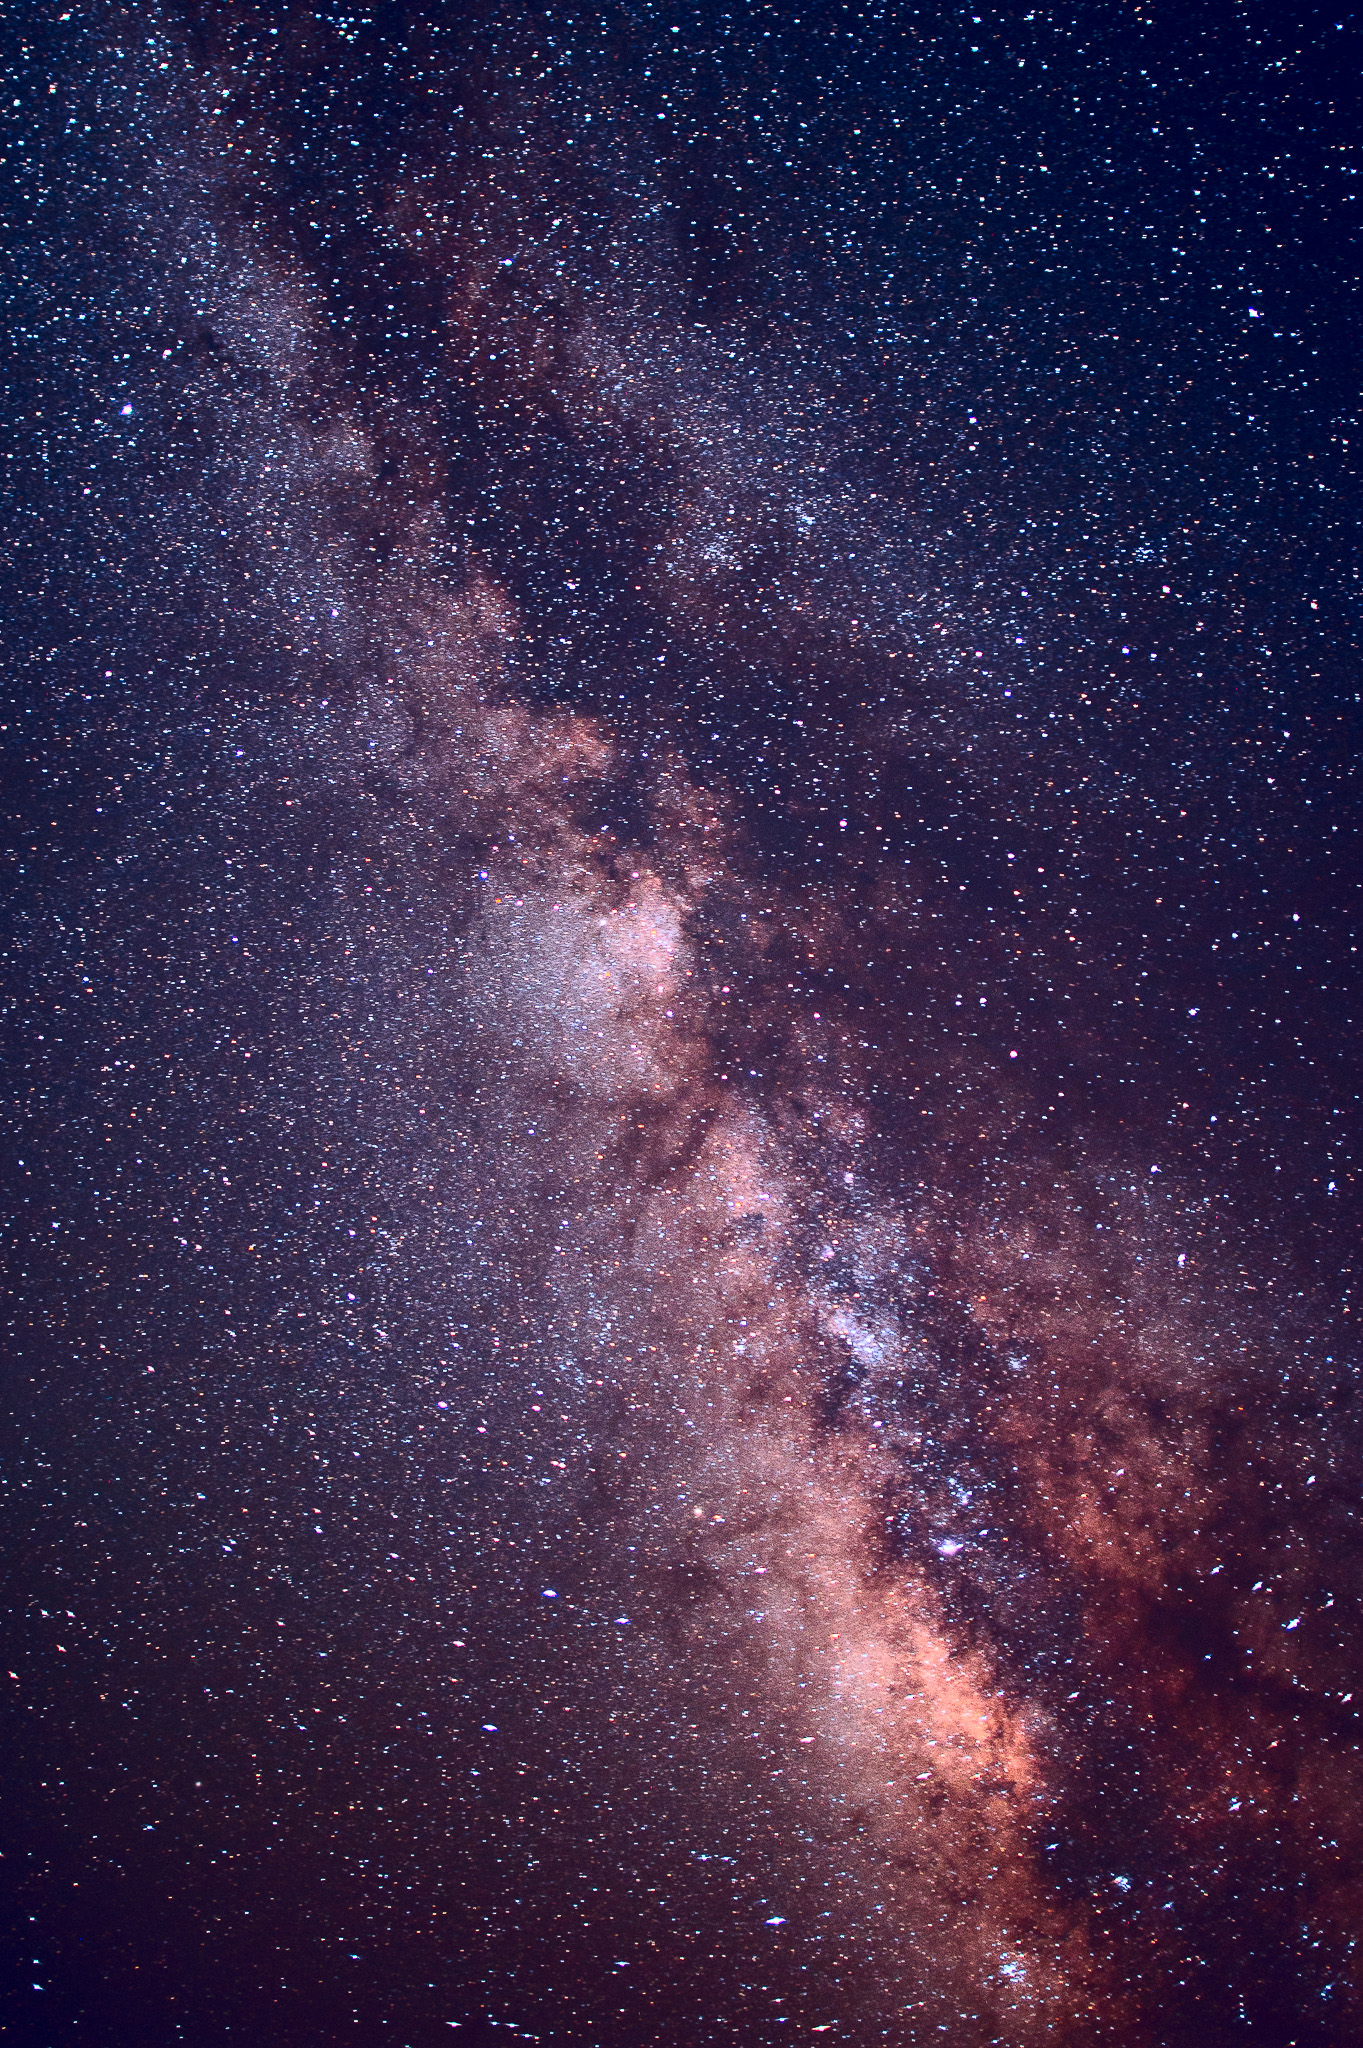 An In-depth guide for Milky Way Photography for Beginners